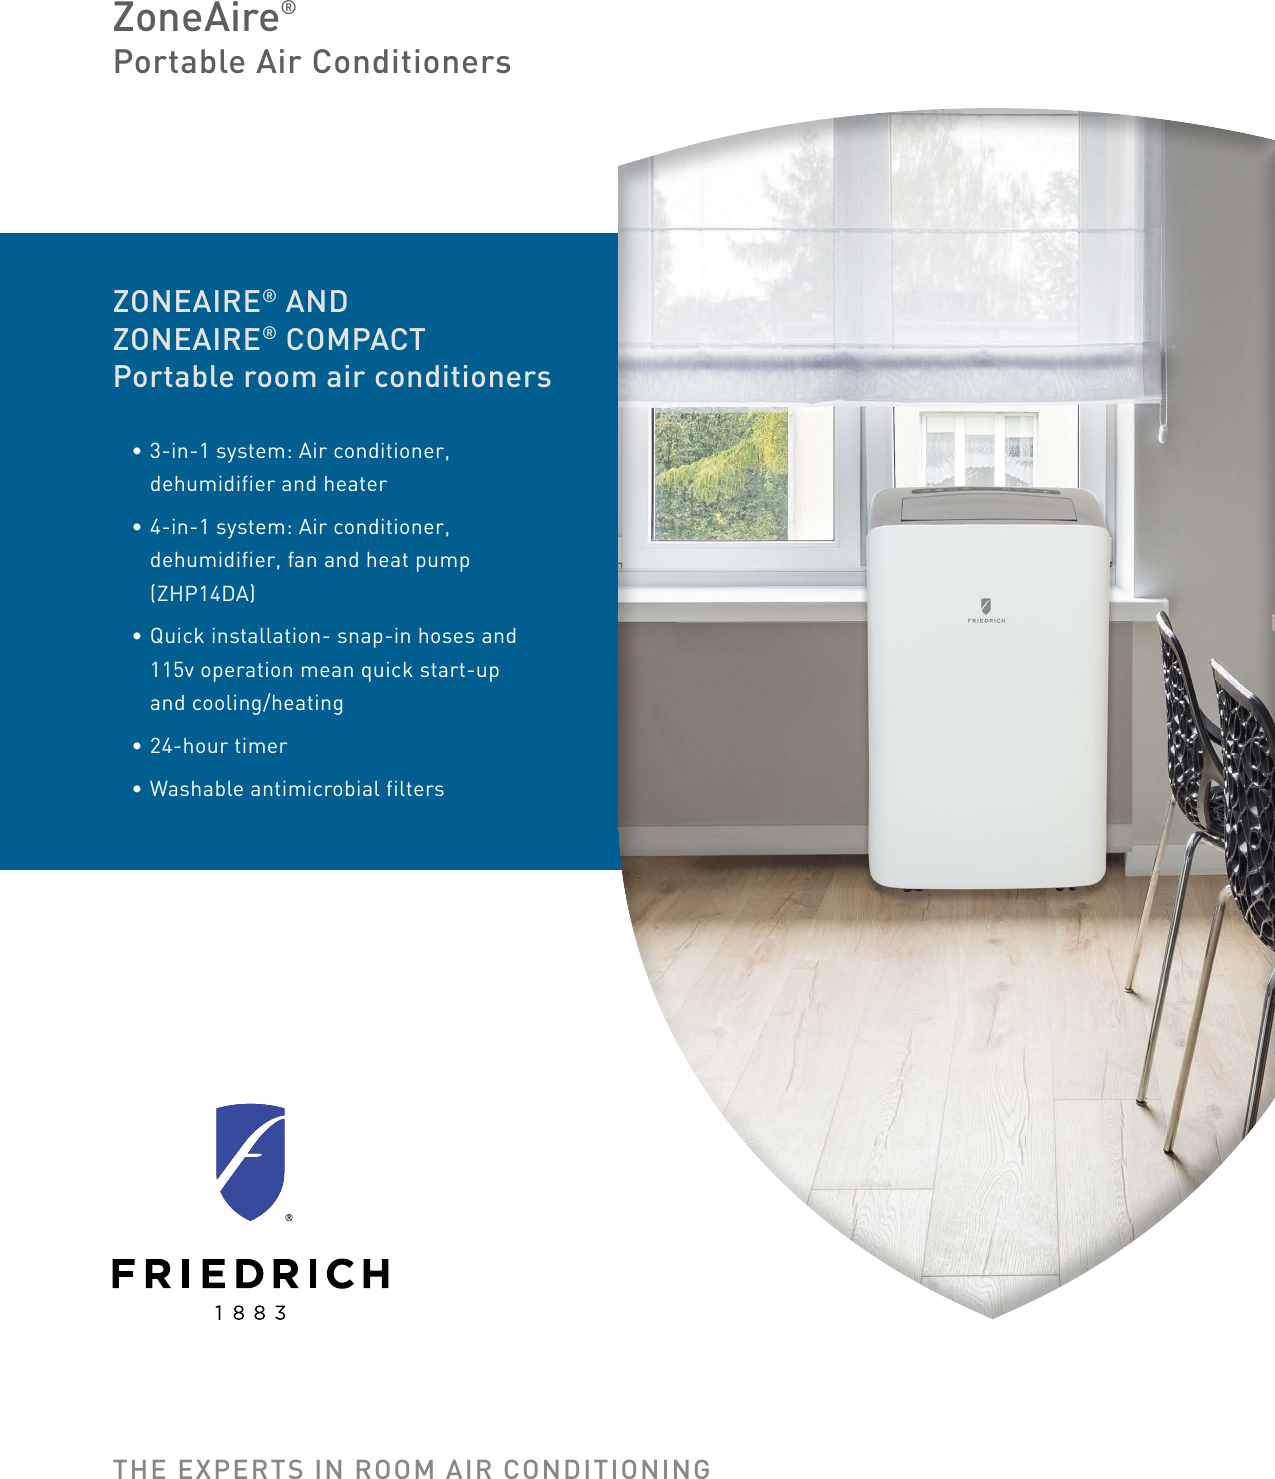 Page 1 of 4 - Friedrich  2019 Portable Air Conditioners Brochure Rev.1